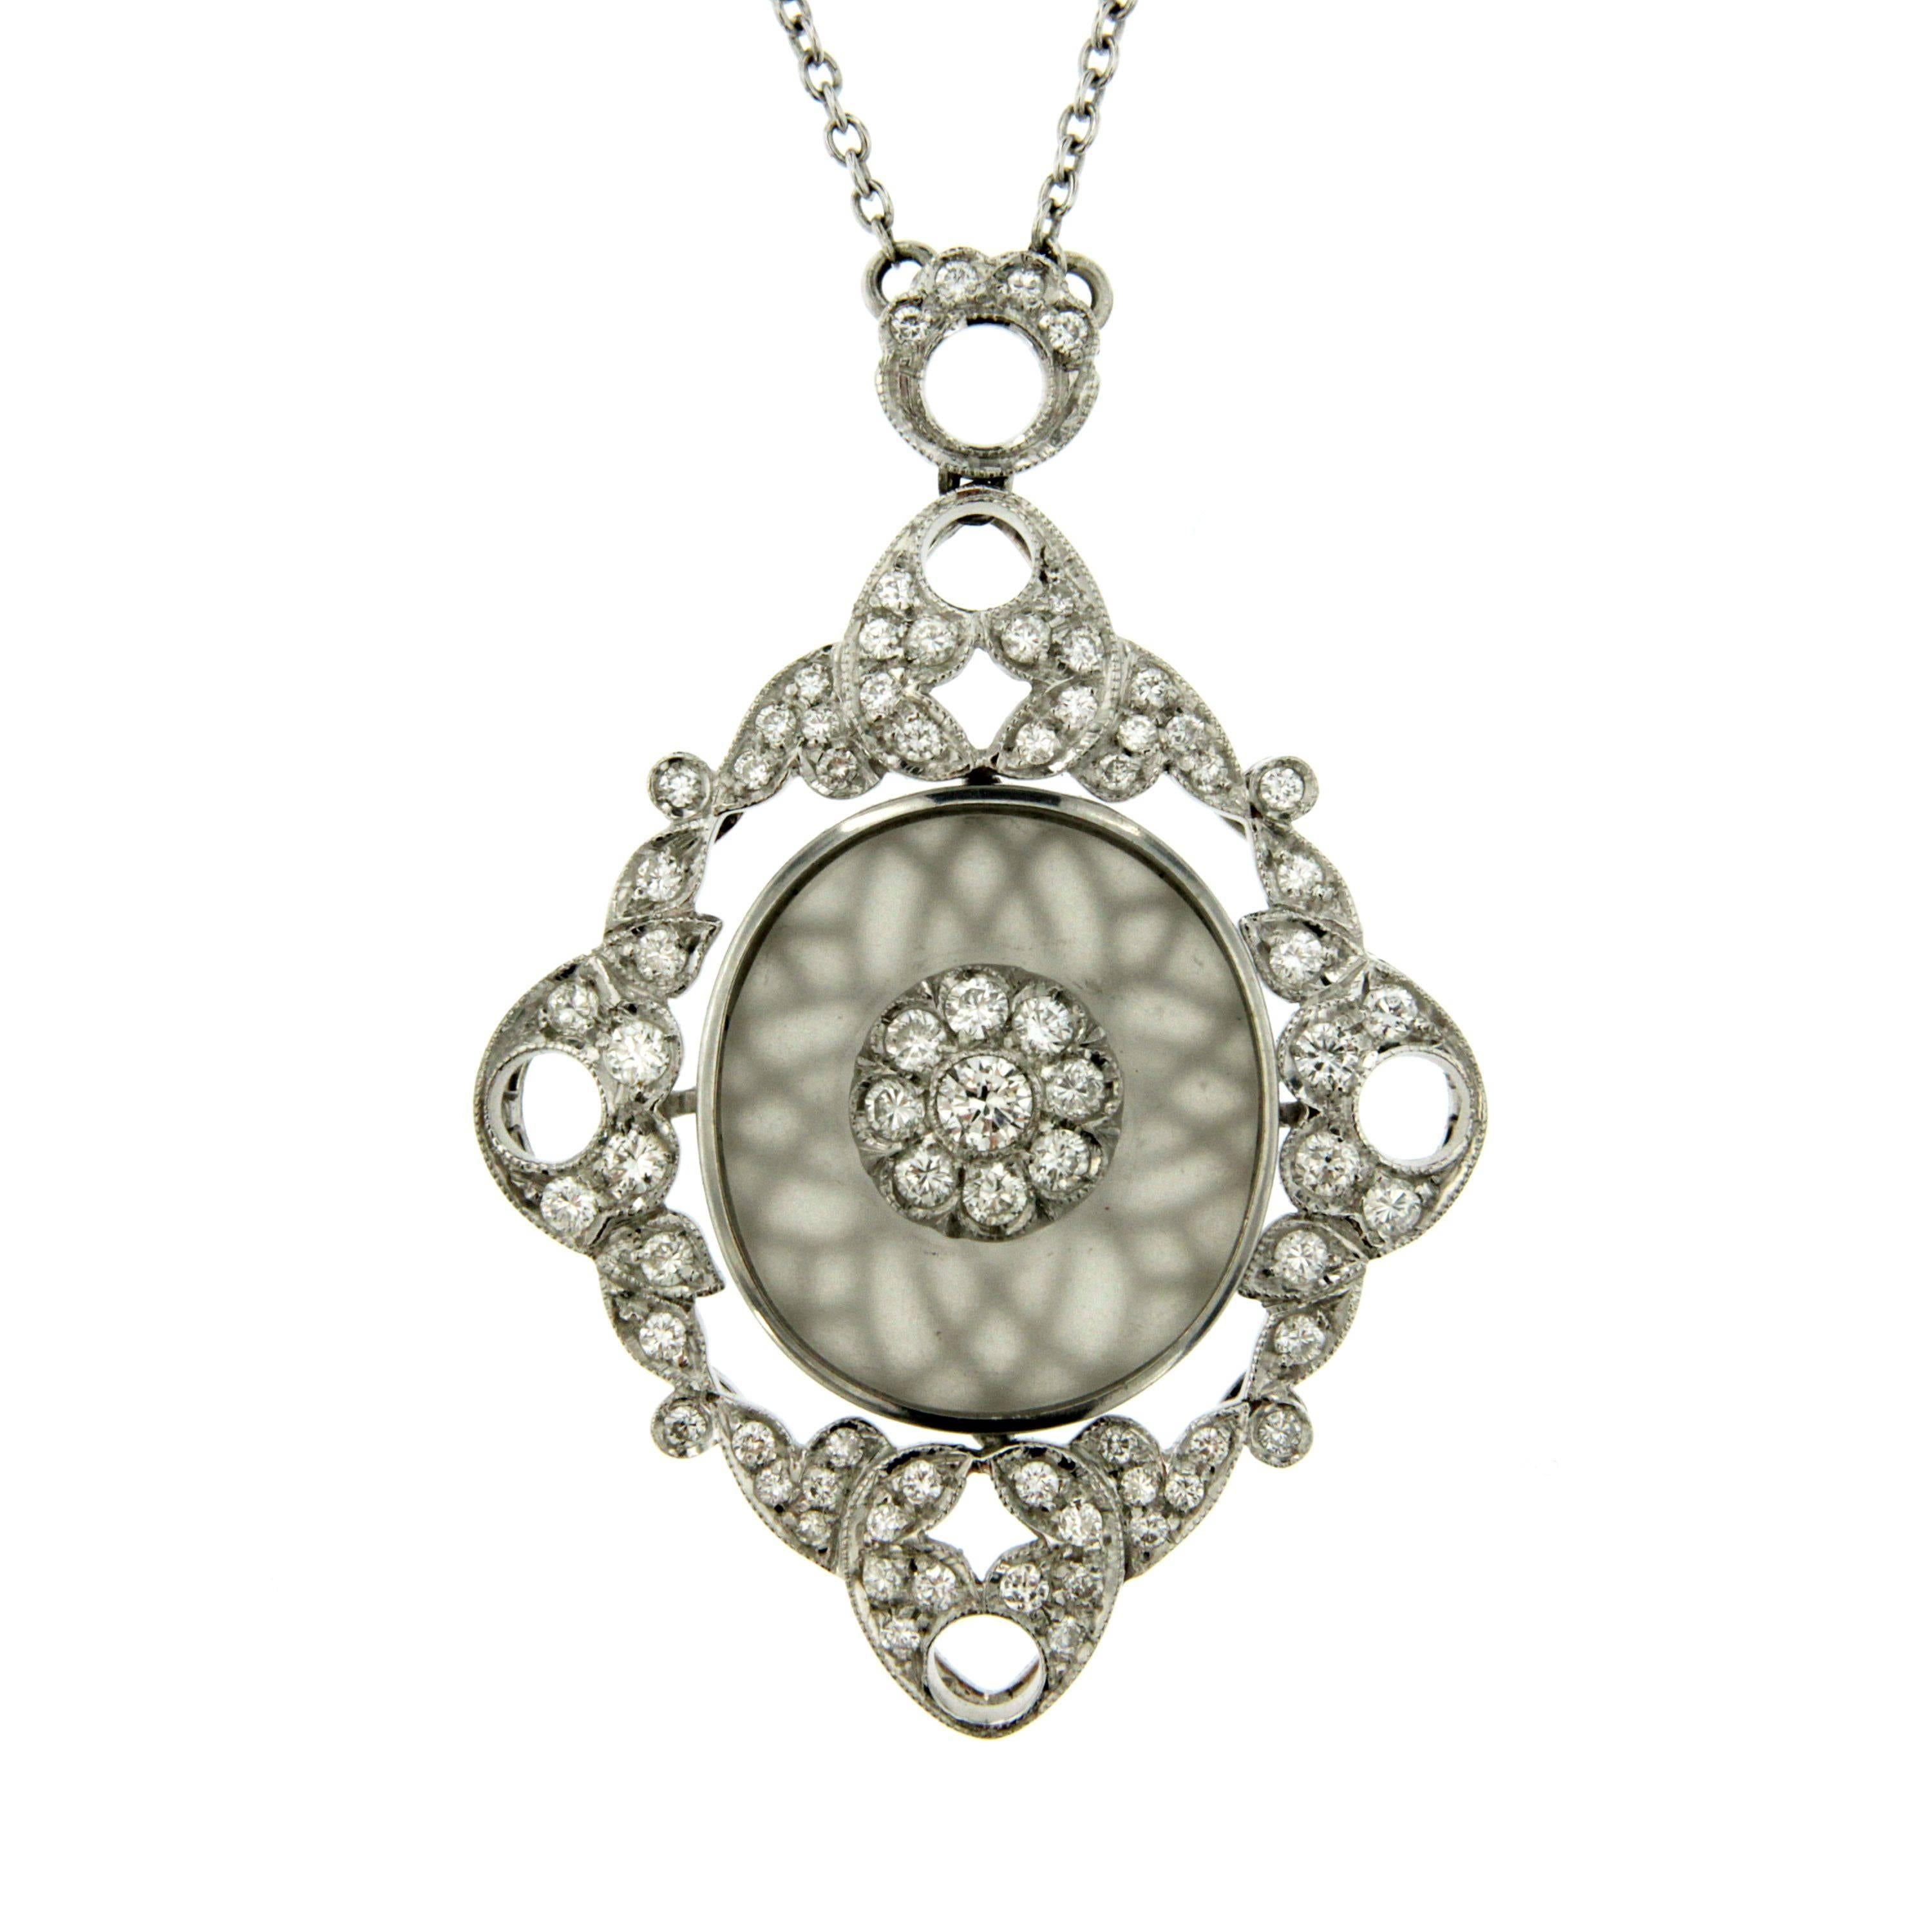 A stunning 18k white gold Art Deco pendant featuring an oval rock crystal plaque set to the center with a flower diamond motif  and framed by old european cut diamonds of estimated total weight 2.00ct, colour G clarity VVS. Circa 1930

CONDITION: